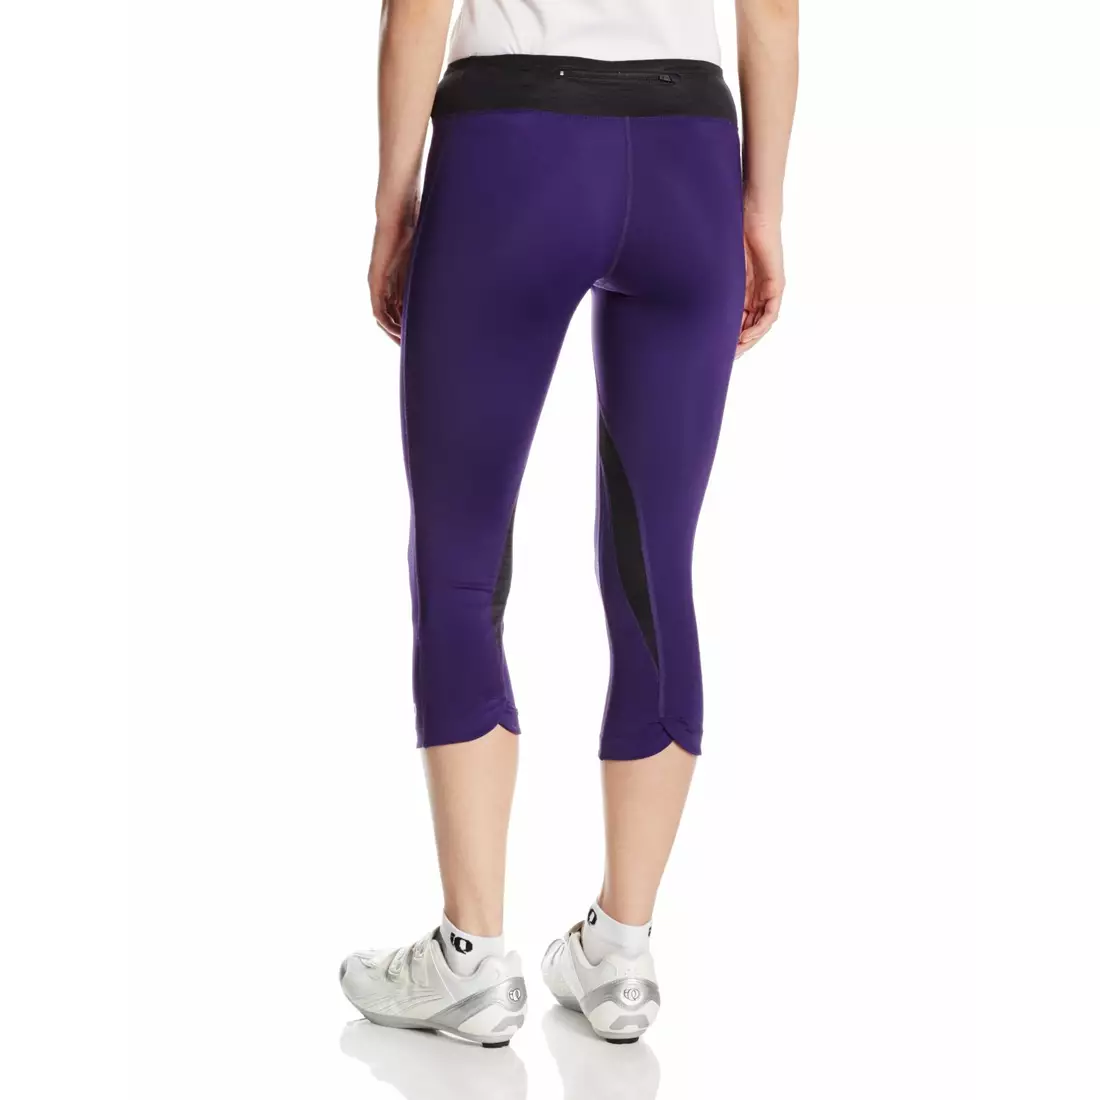 PEARL IZUMI - W's Fly 3/4 Tight 12211406-4GE - women's 3/4 running shorts, color: Purple